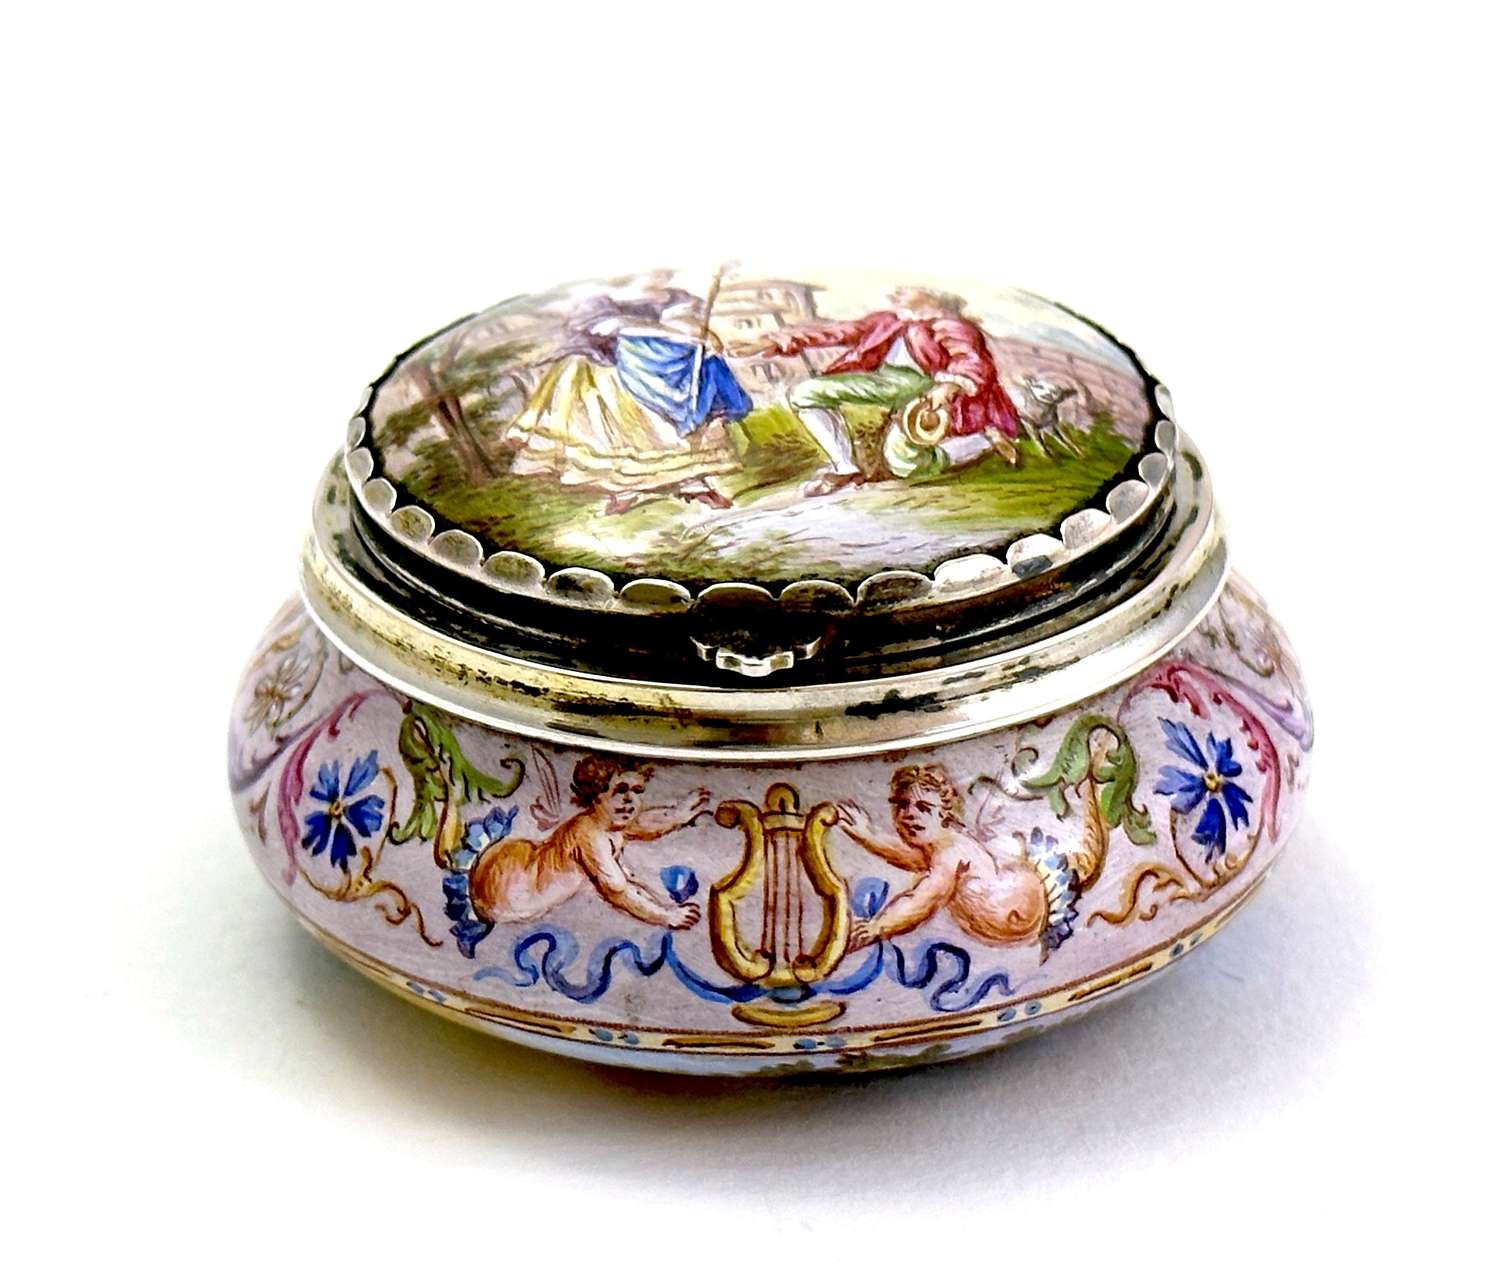 Exceptional High Quality Antique Enamelled and Silver Pill Box.